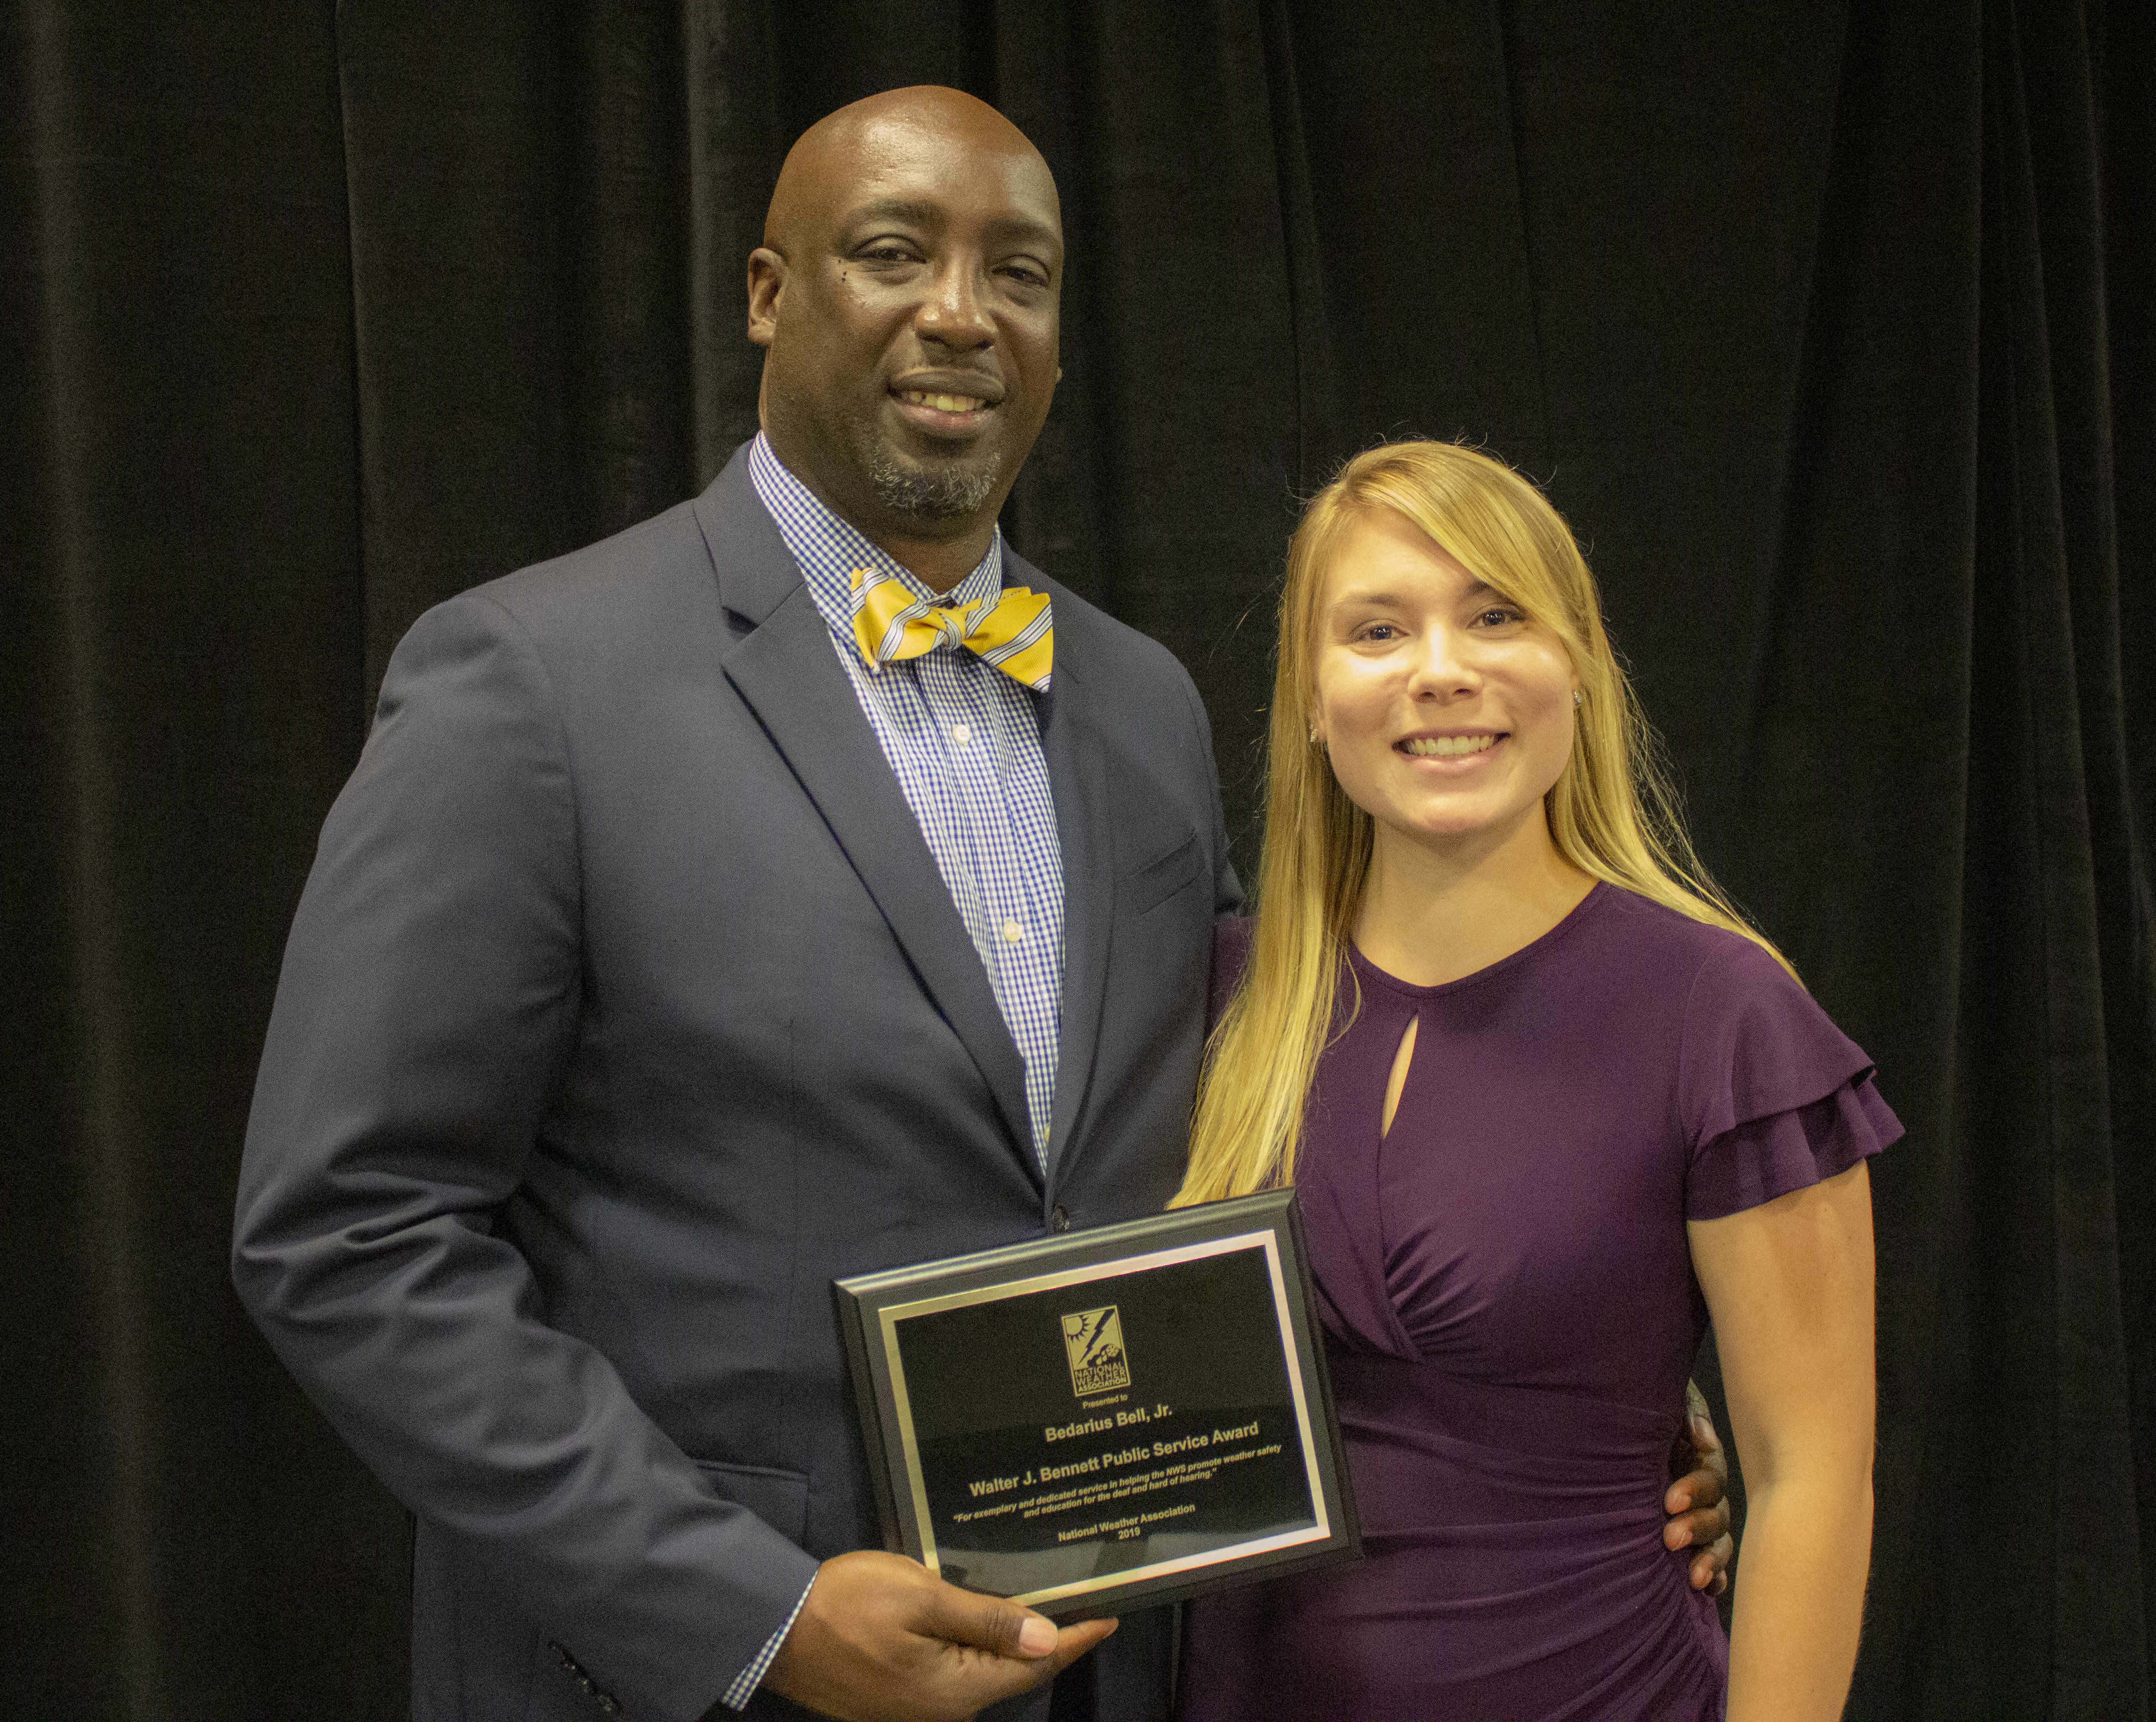 Bedarius Bell Jr. with Jennifer Saari, who nominated Bell for the "Walter J. Bennet Public Service Award."